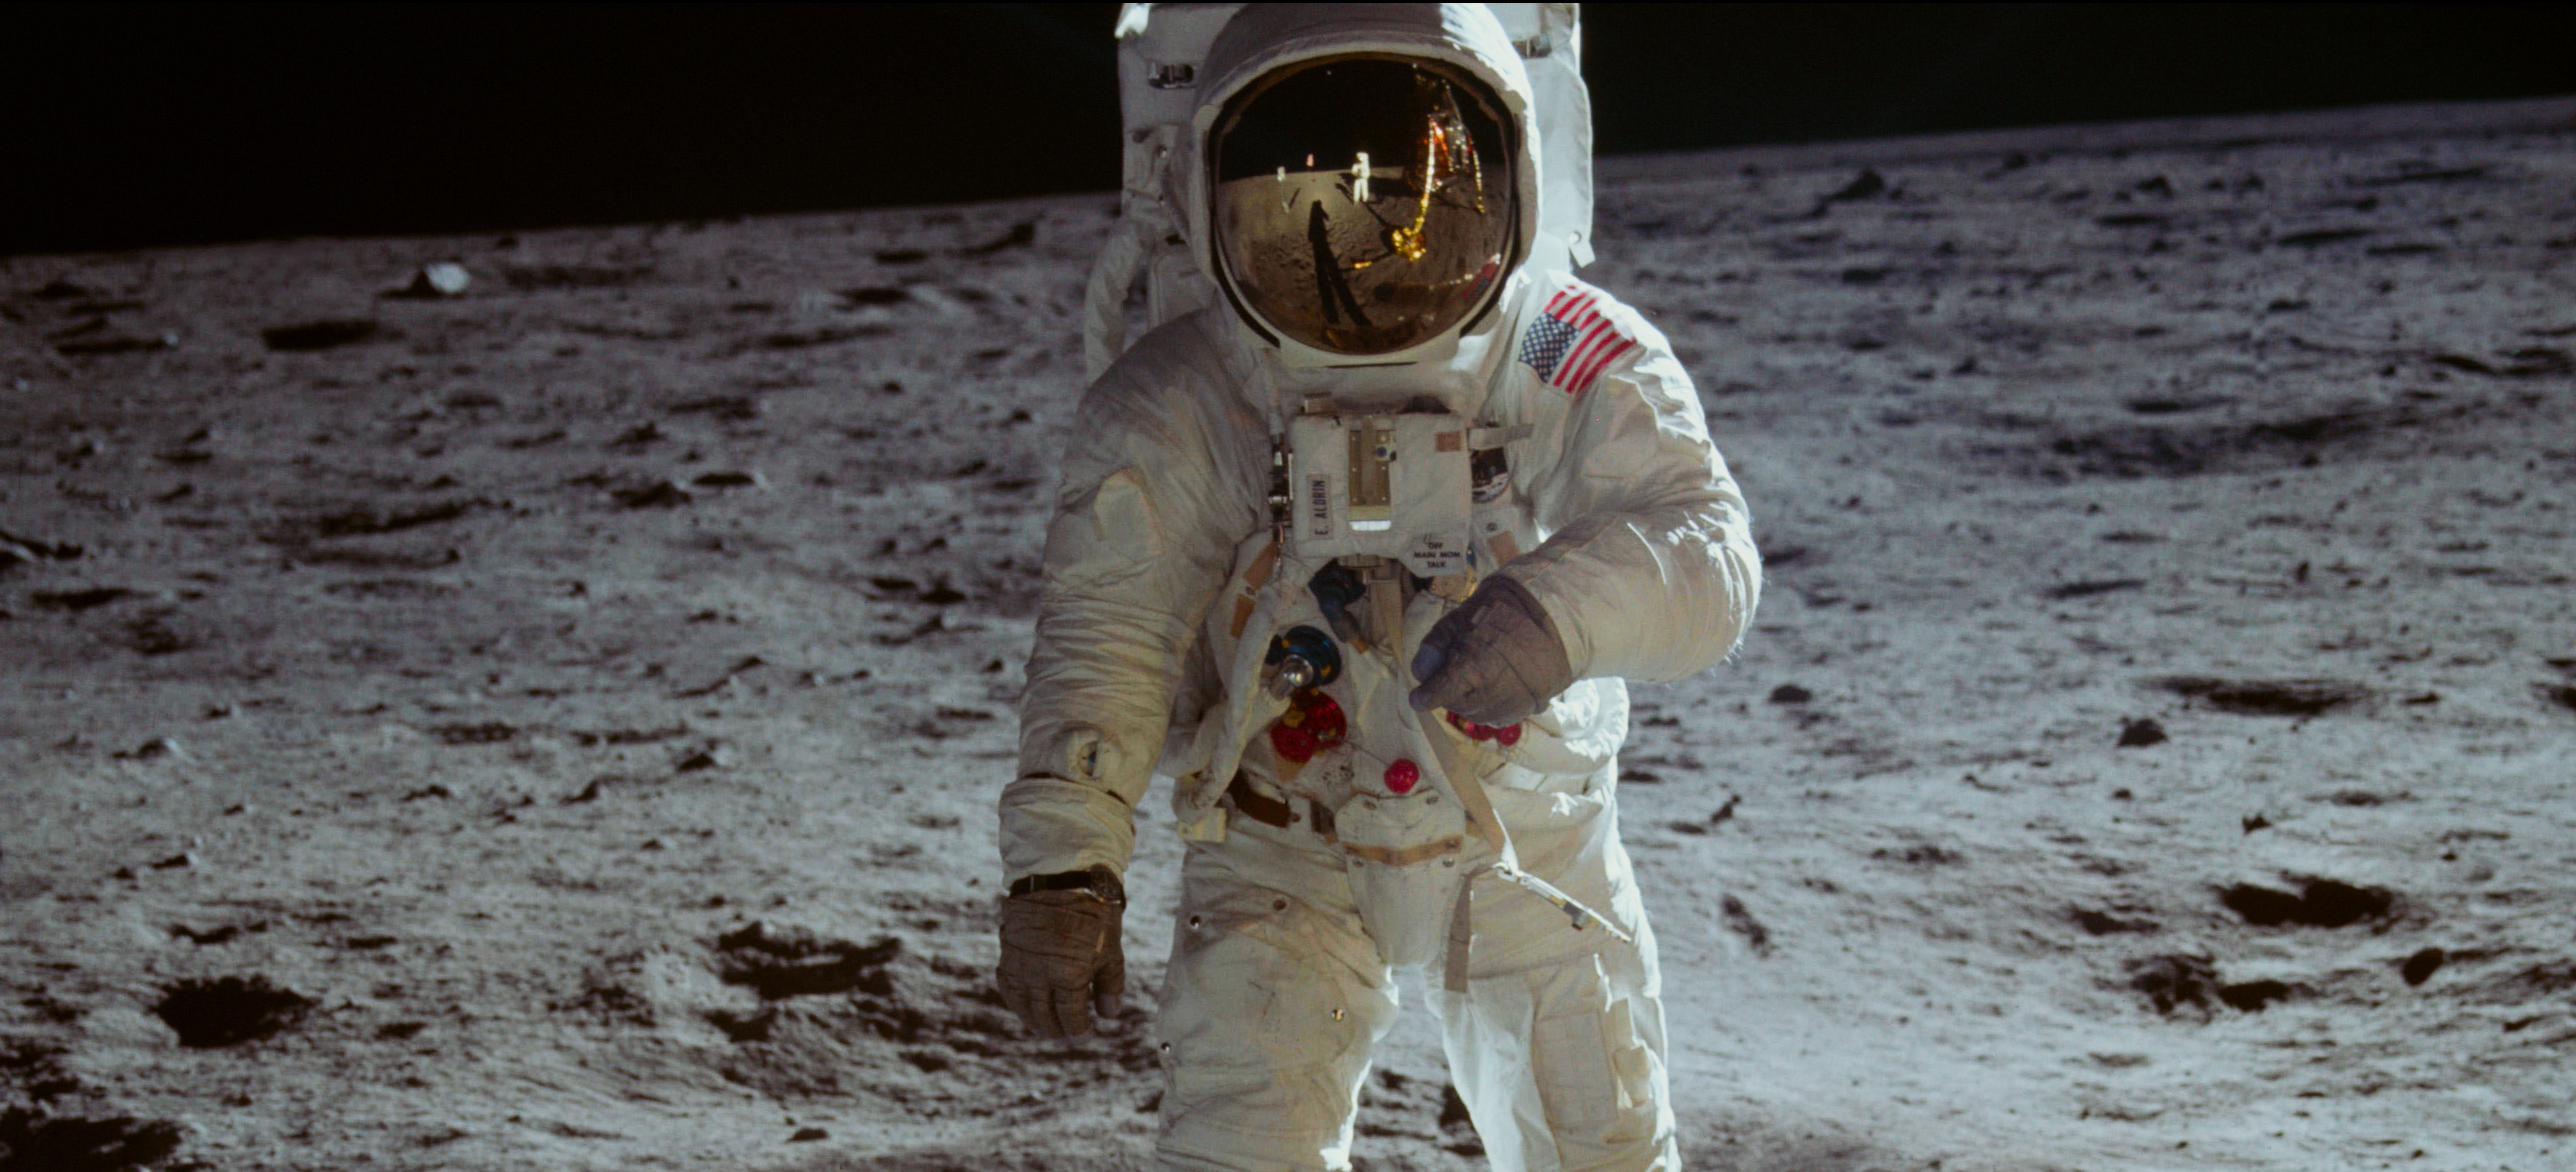 Neil Armstrong on the moon in Apollo 11